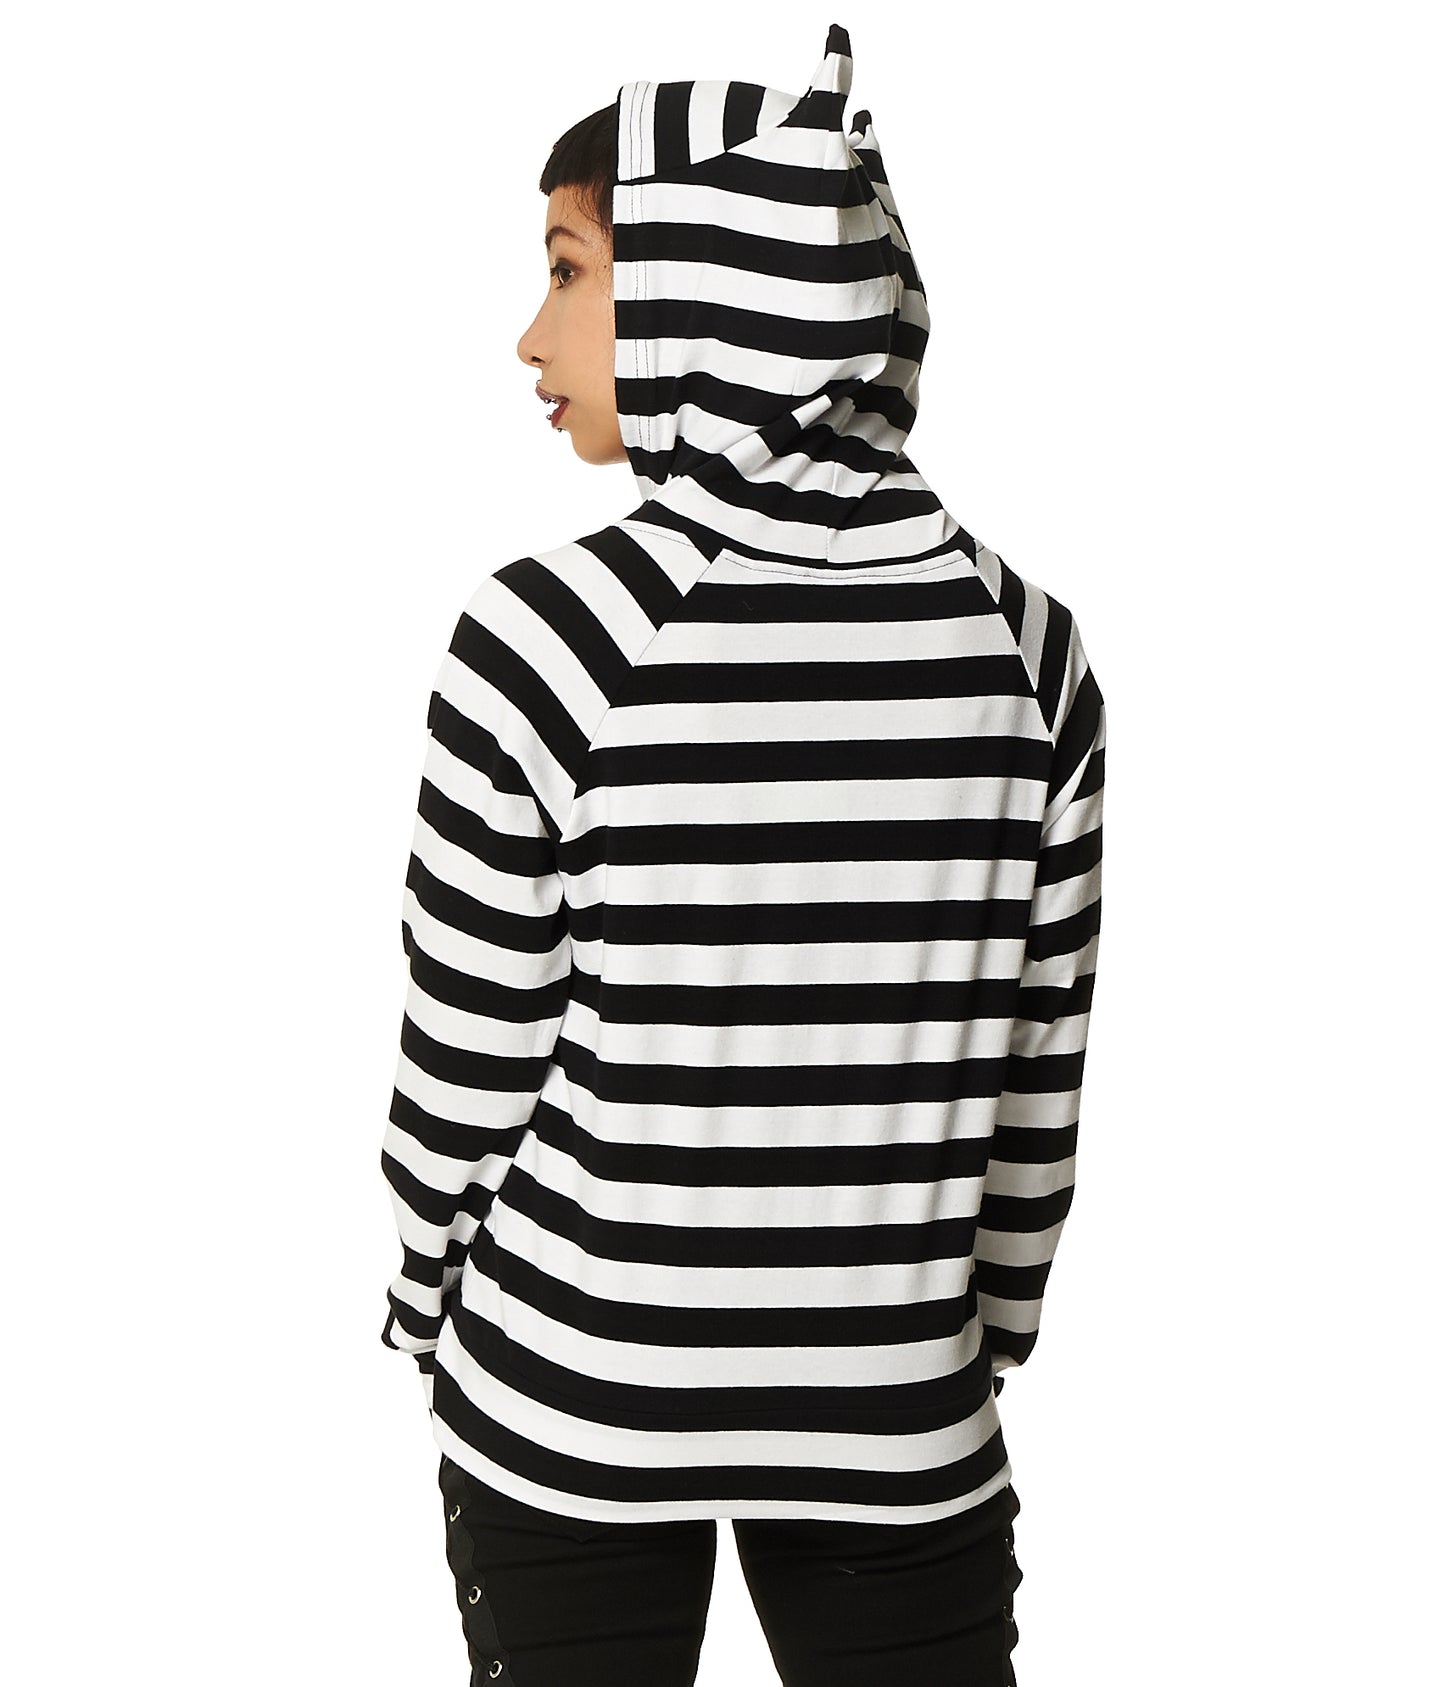 Model wearing a black and white stripes zip up hoodie with cat ears on the hood and thumb holes in the sleeves